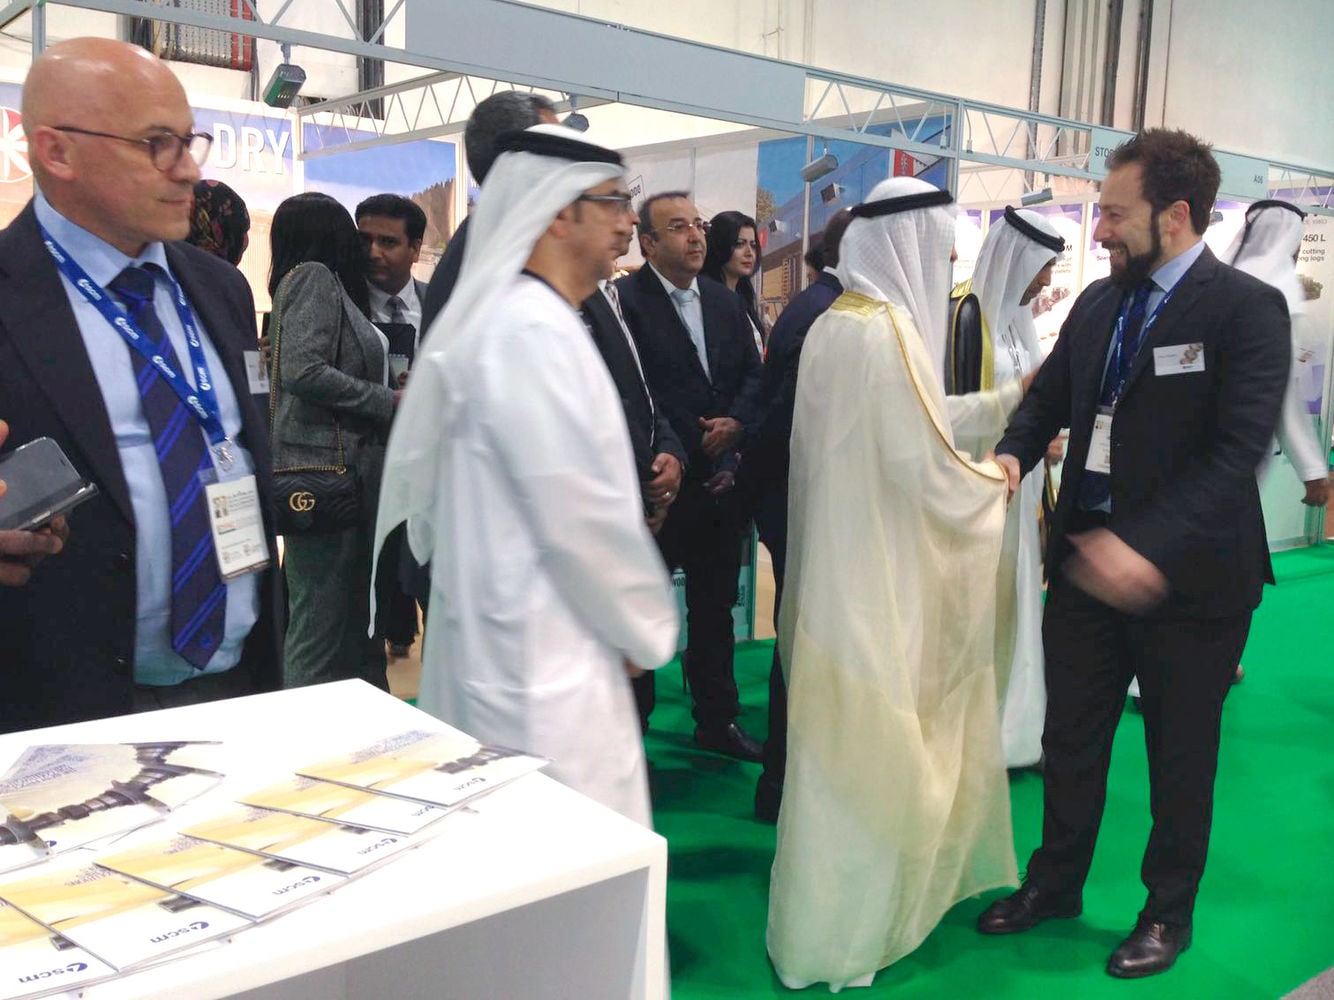 SCM lights up the Dubai Woodshow with its Work Simple, Work Digital